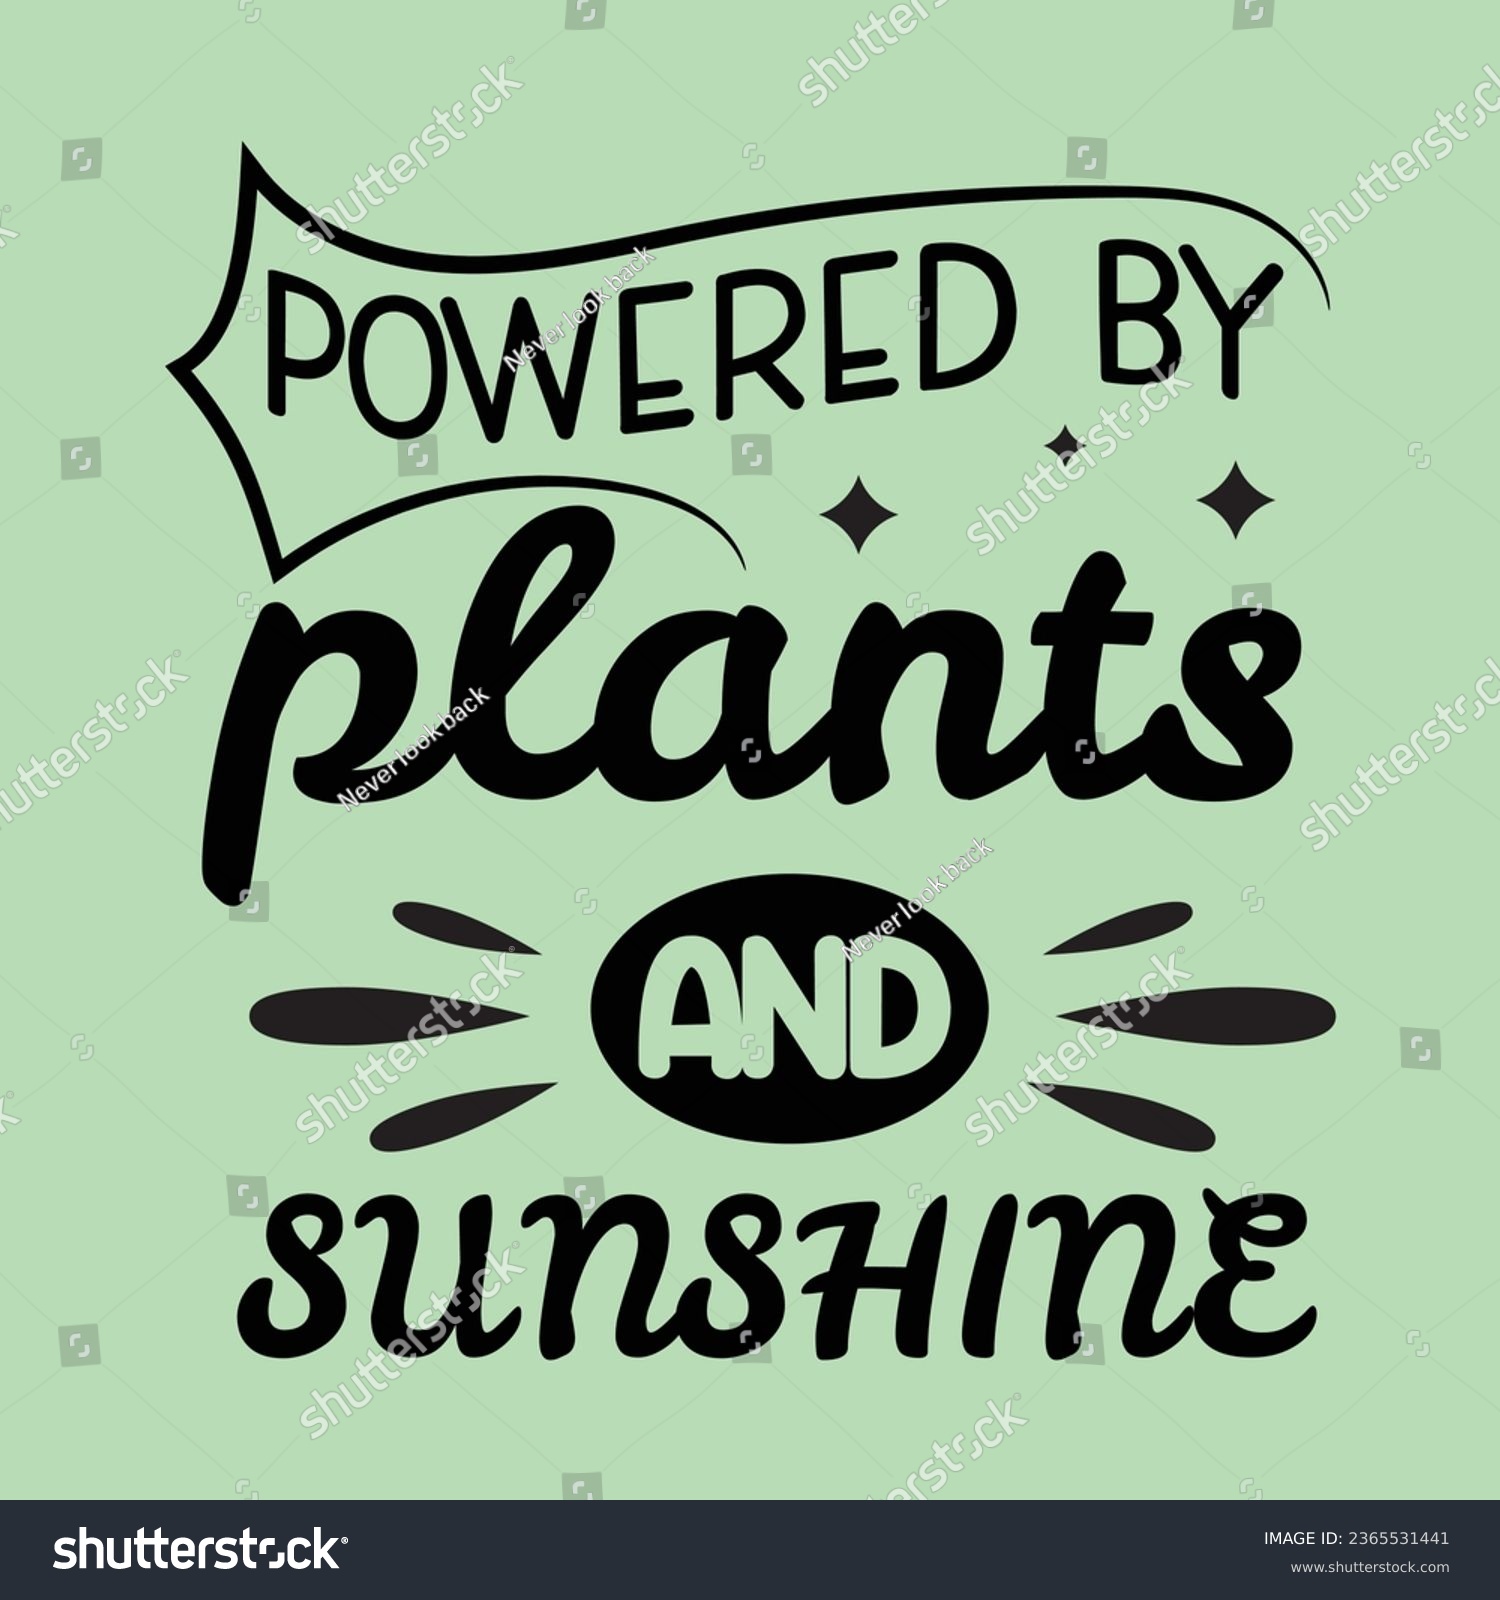 SVG of powered by plants and sunshine ,World Vegan Day typography design for t-shirt, cards, frame artwork, bags, mugs, stickers, Organic food tag, icon. svg